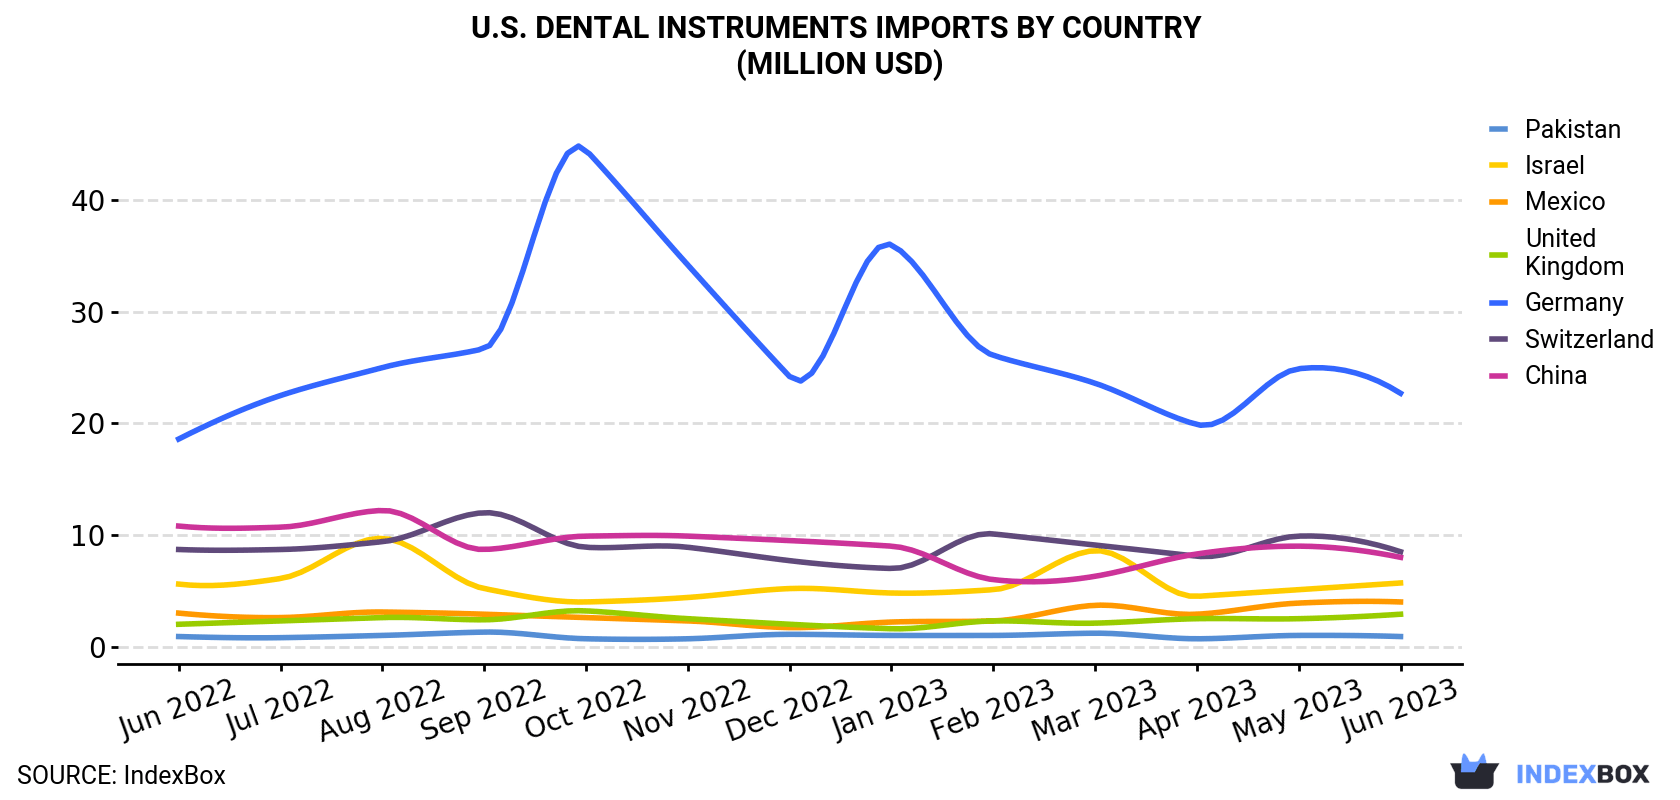 U.S. Dental Instruments Imports By Country (Million USD)